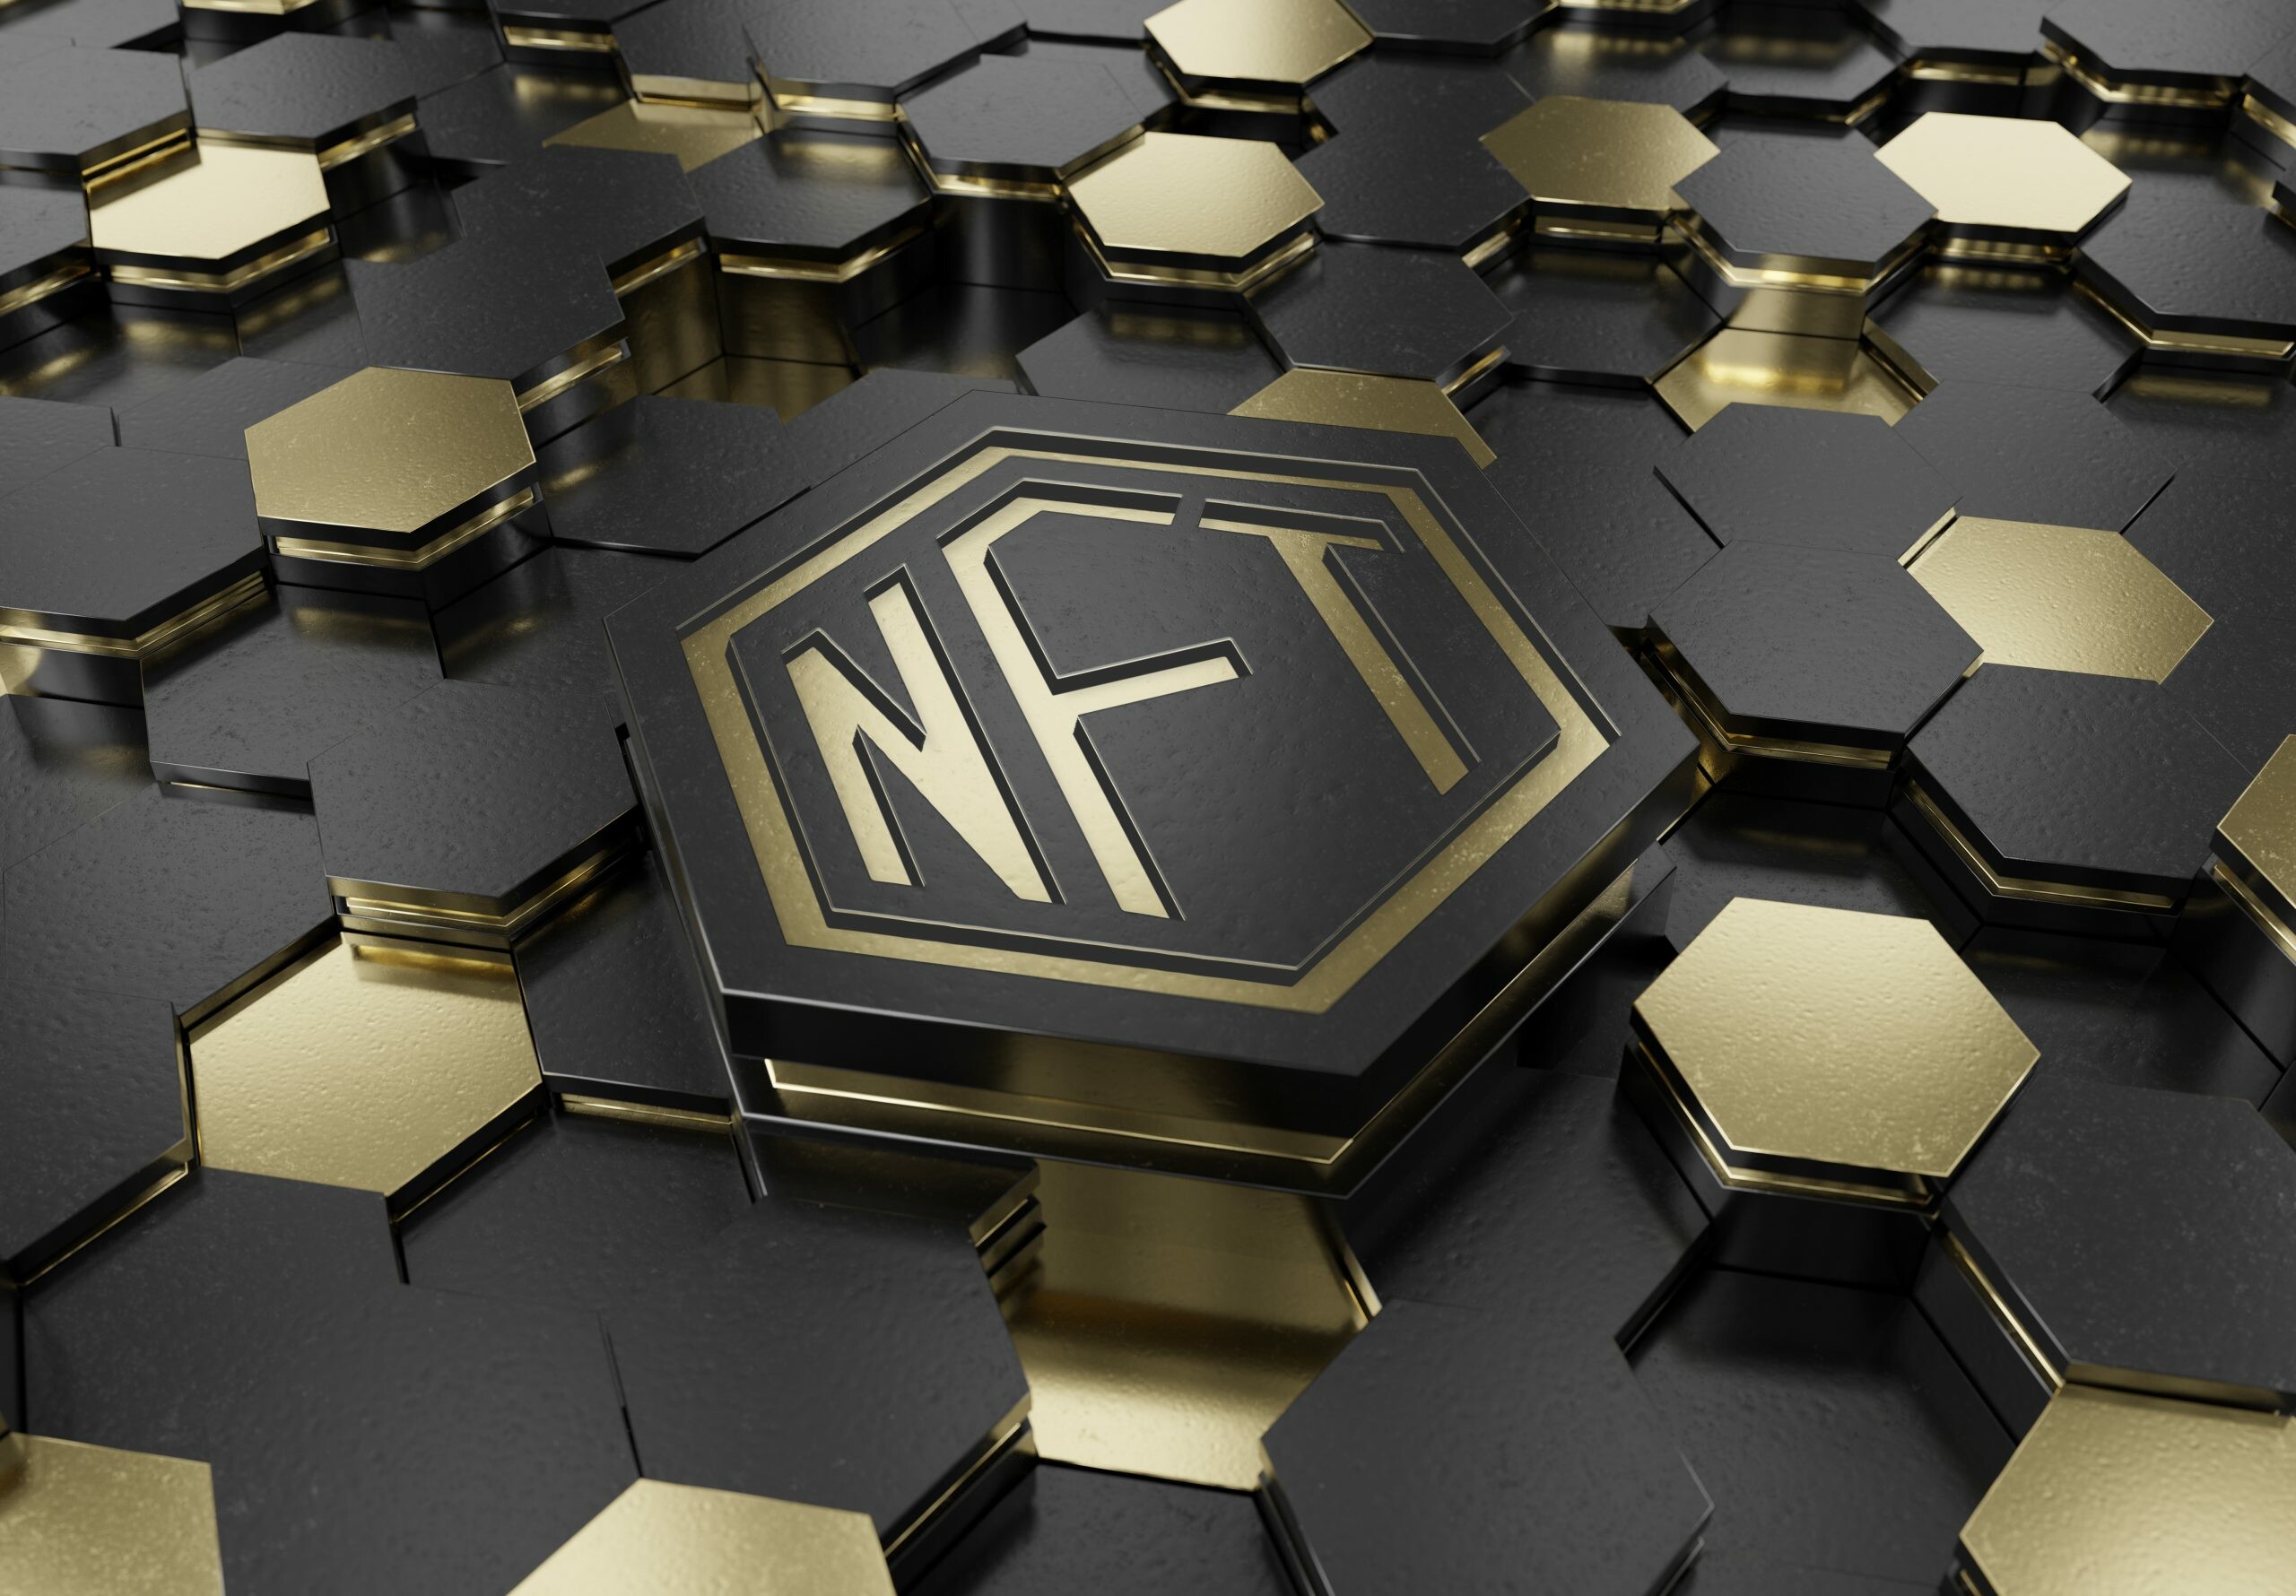 NFT: A non-fungible token, A unit of data that lives on a blockchain. 2560x1780 HD Wallpaper.